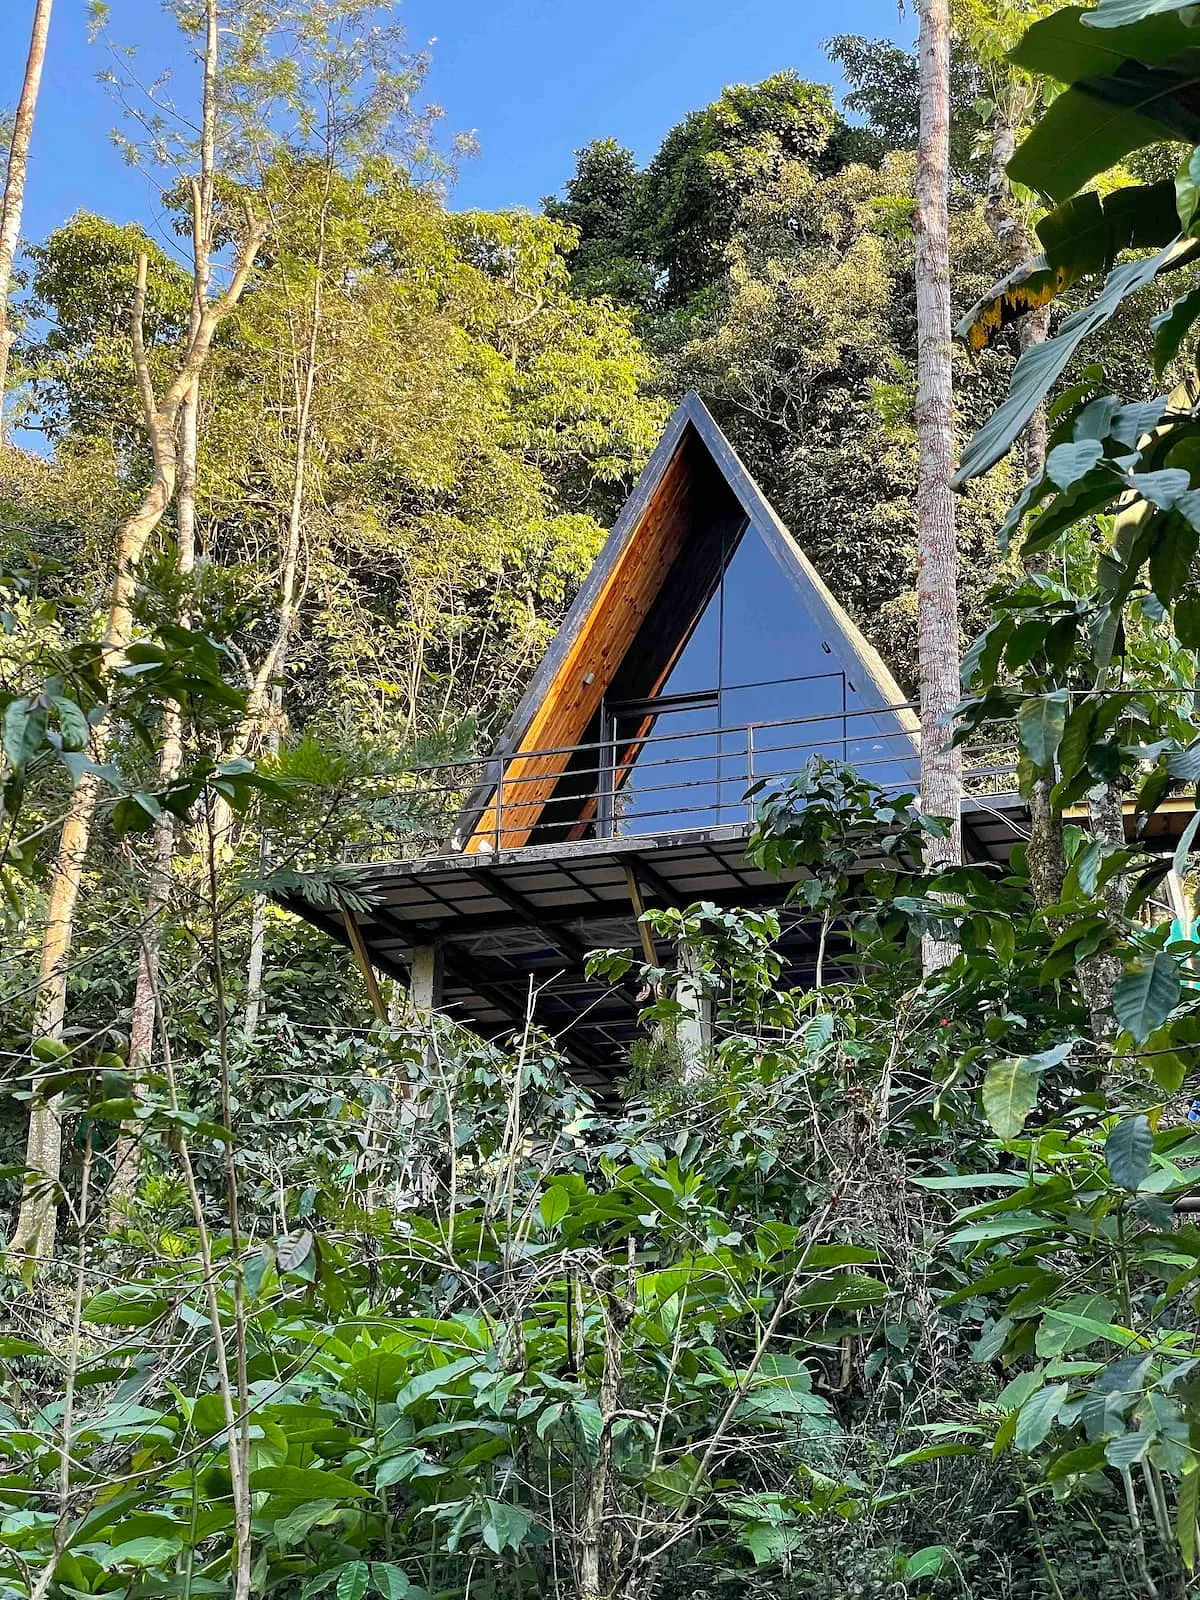 1N/2D at an A-Frame Cabin Stay at Chikmagalur Coffee Estate